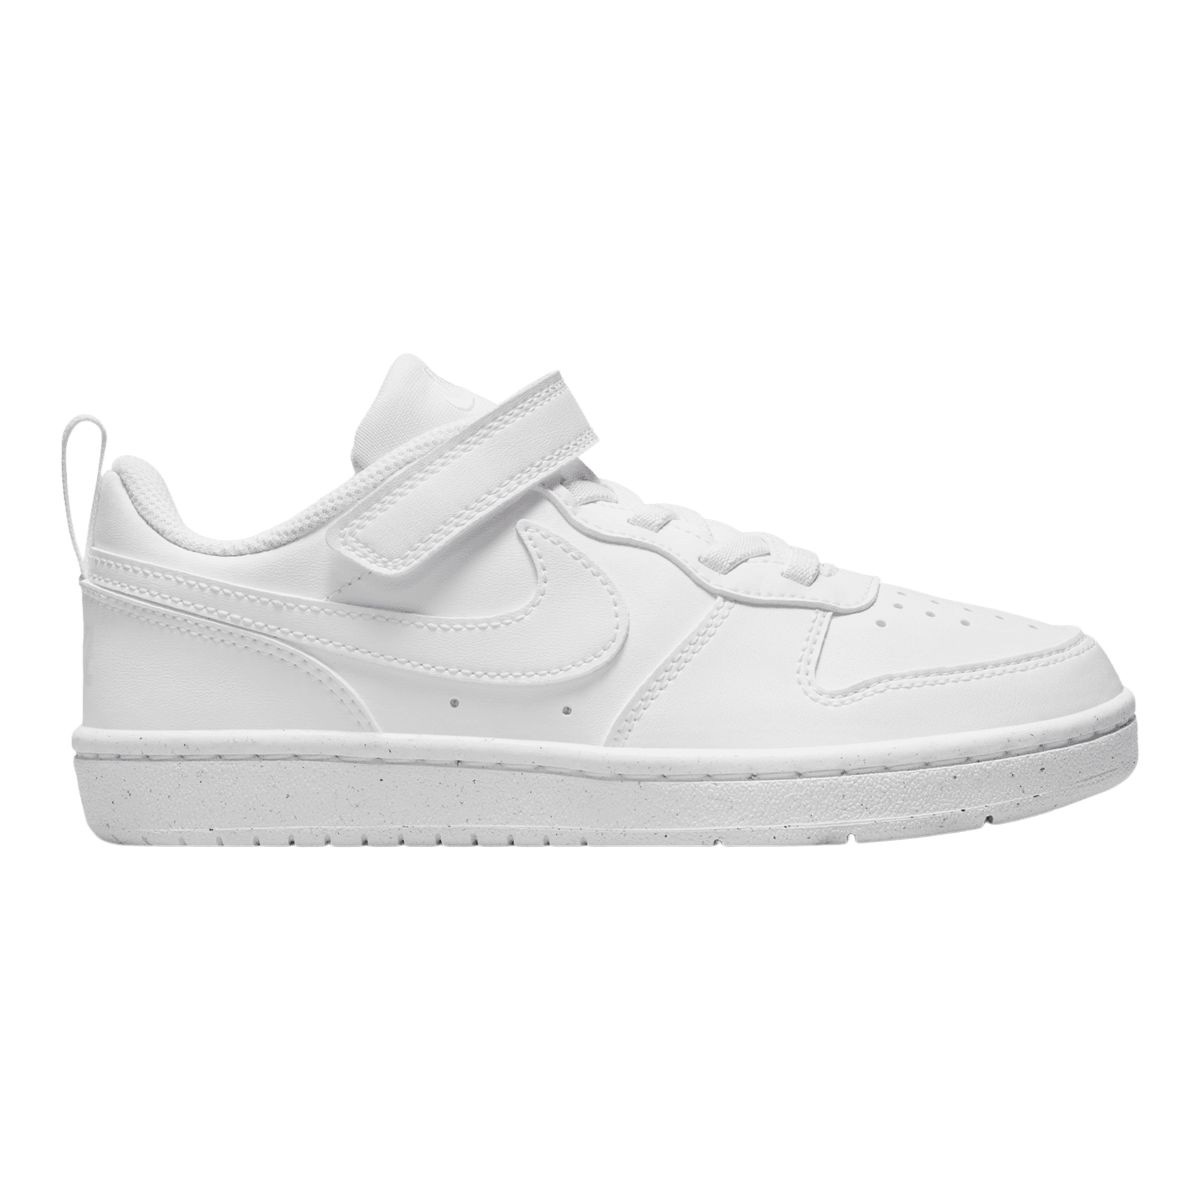 Image of Nike Kids' Pre-School Court Borough Low RC Shoes Sneakers